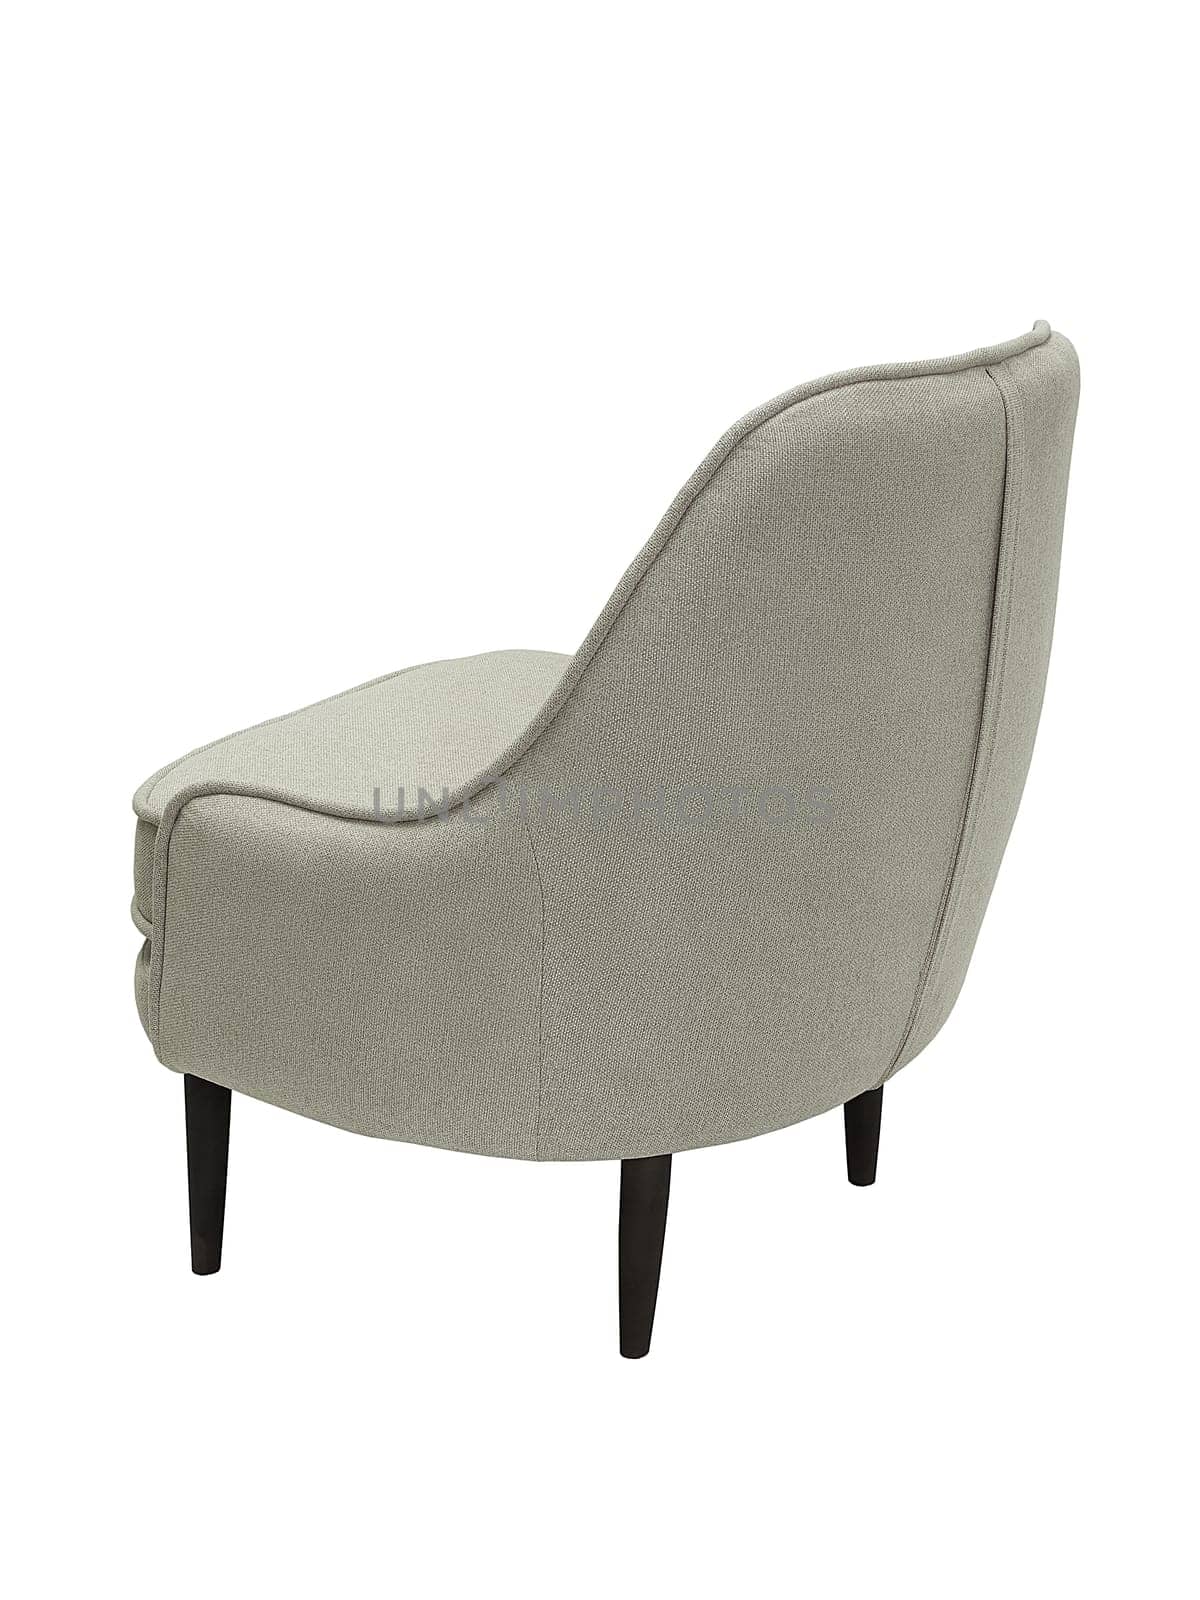 modern fabric grey armchair with wooden legs isolated on white background, back view.